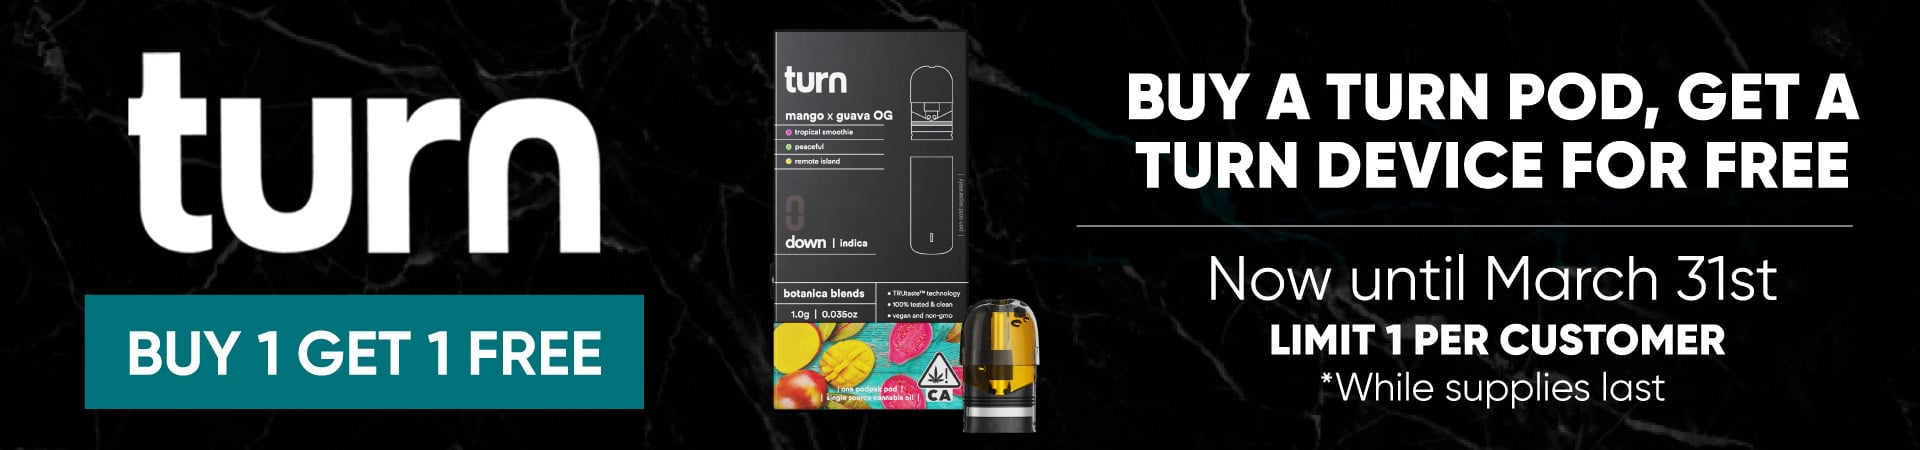 Buy a Turn pod, get a Turn device for free.